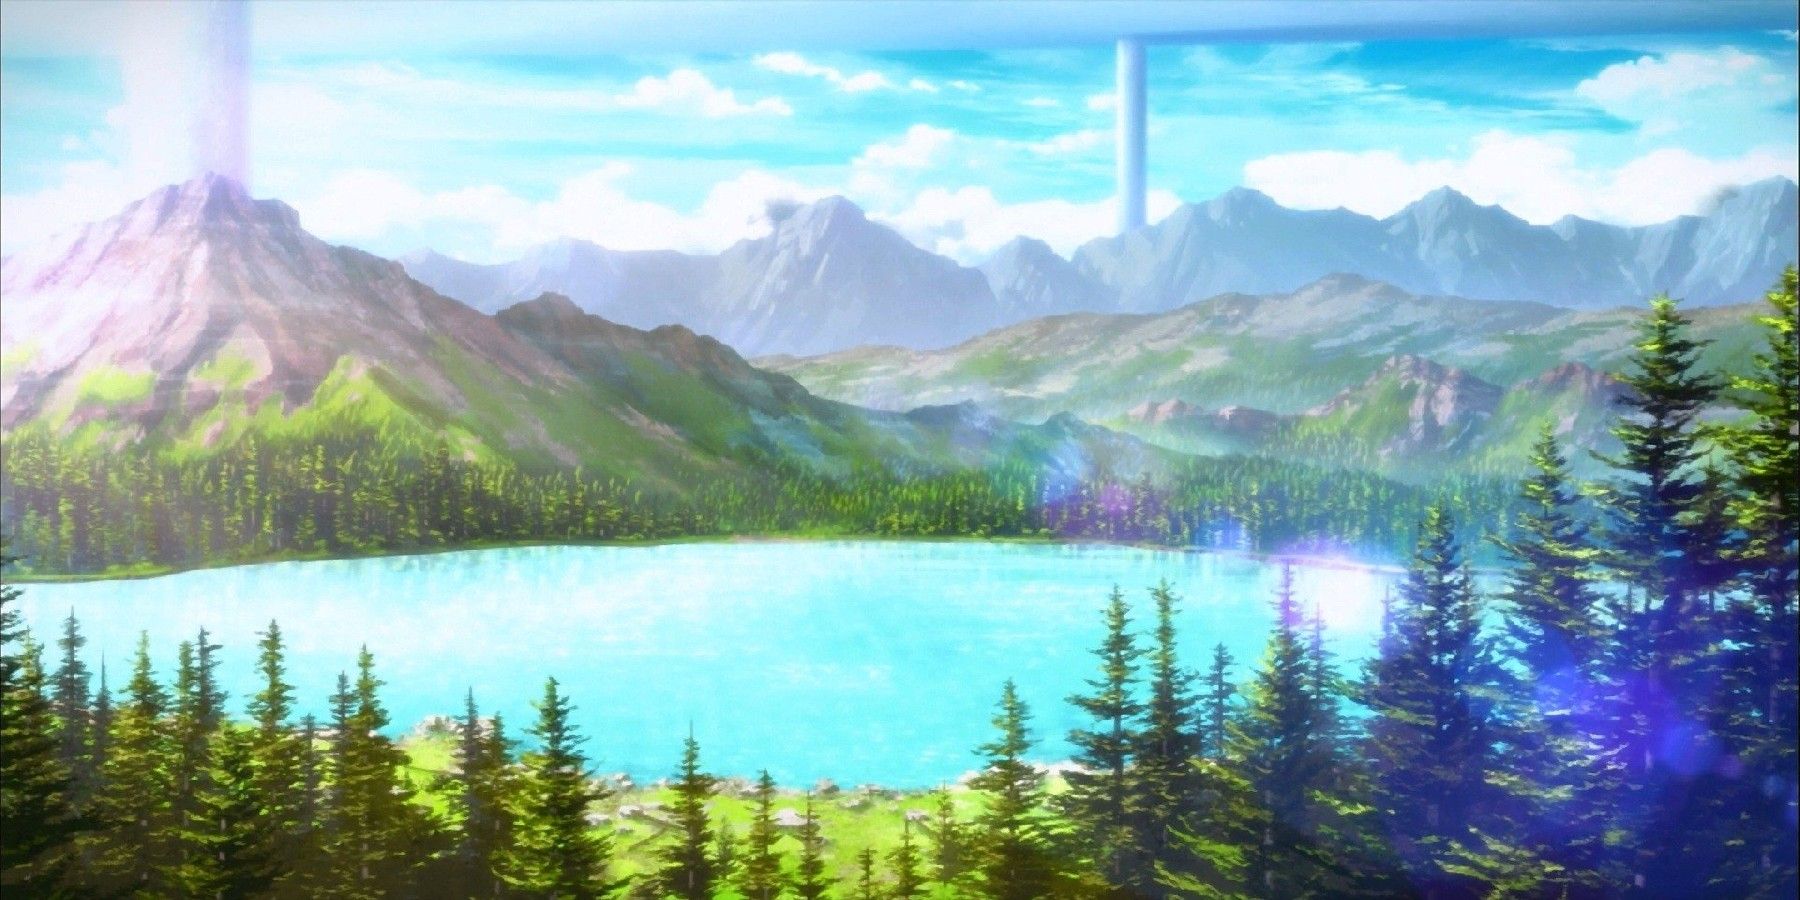 A lake in Sword Art Online's VR world Aincrad